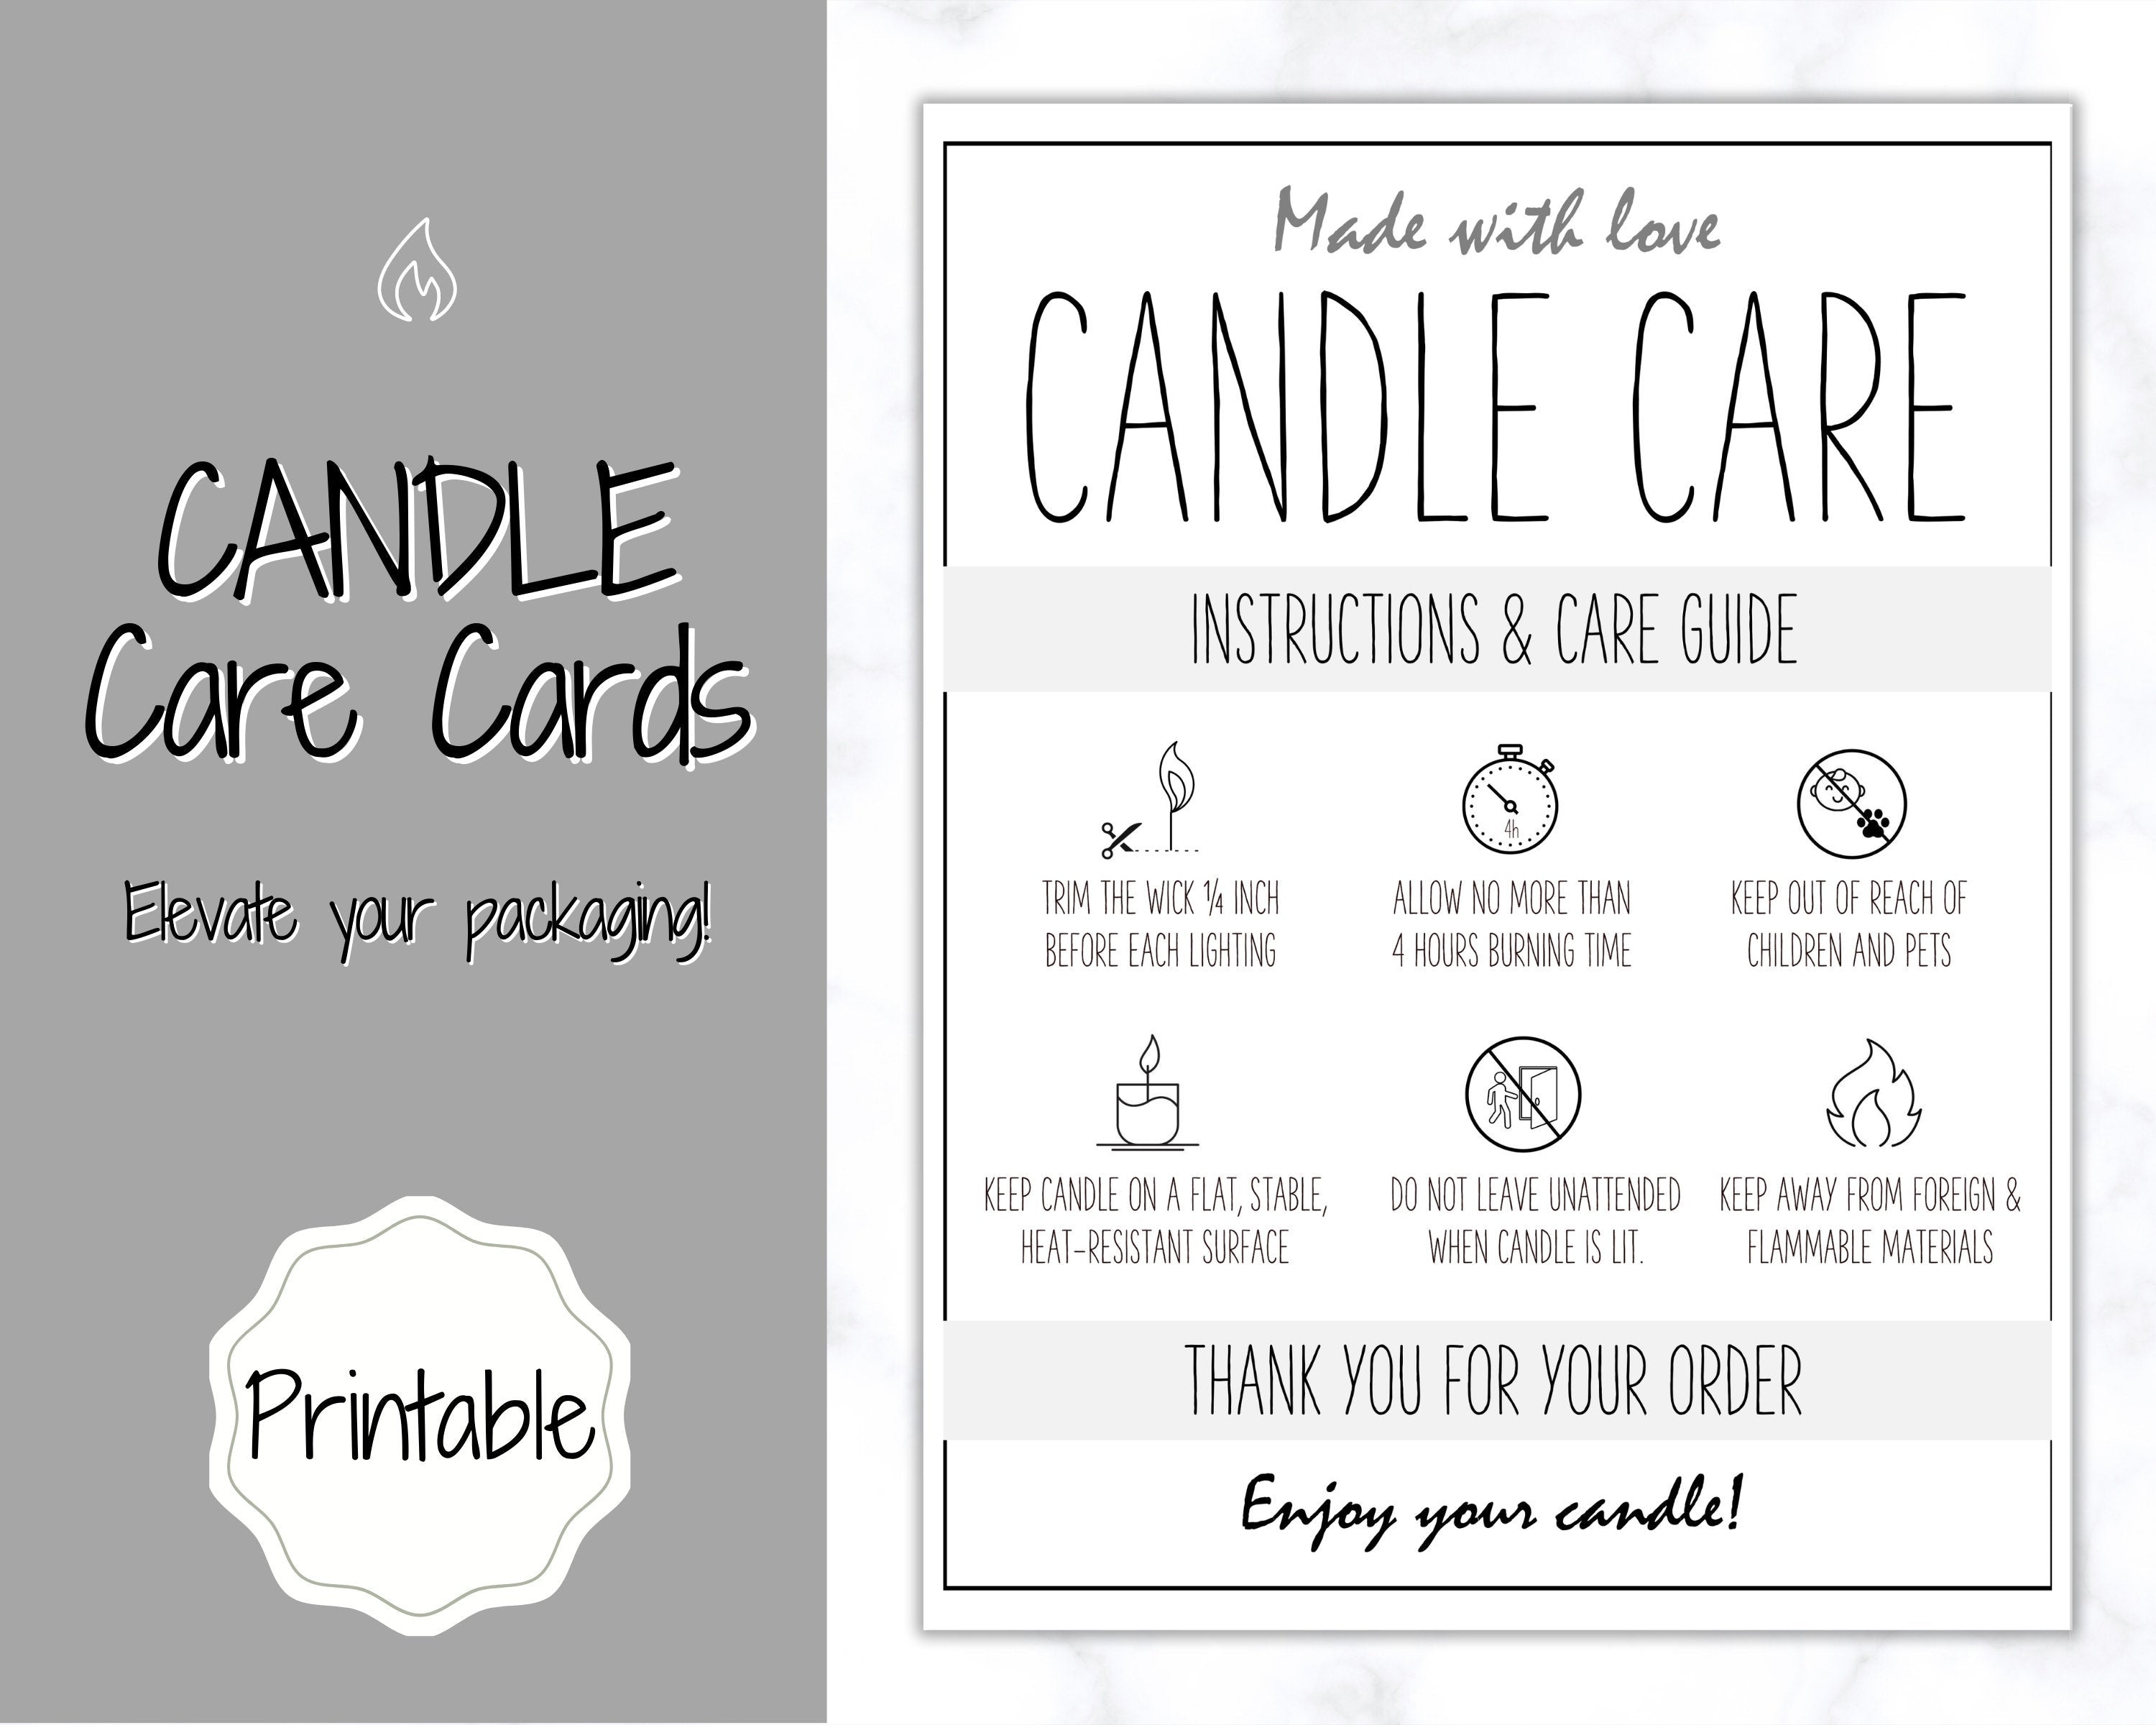 How to care for your candle?